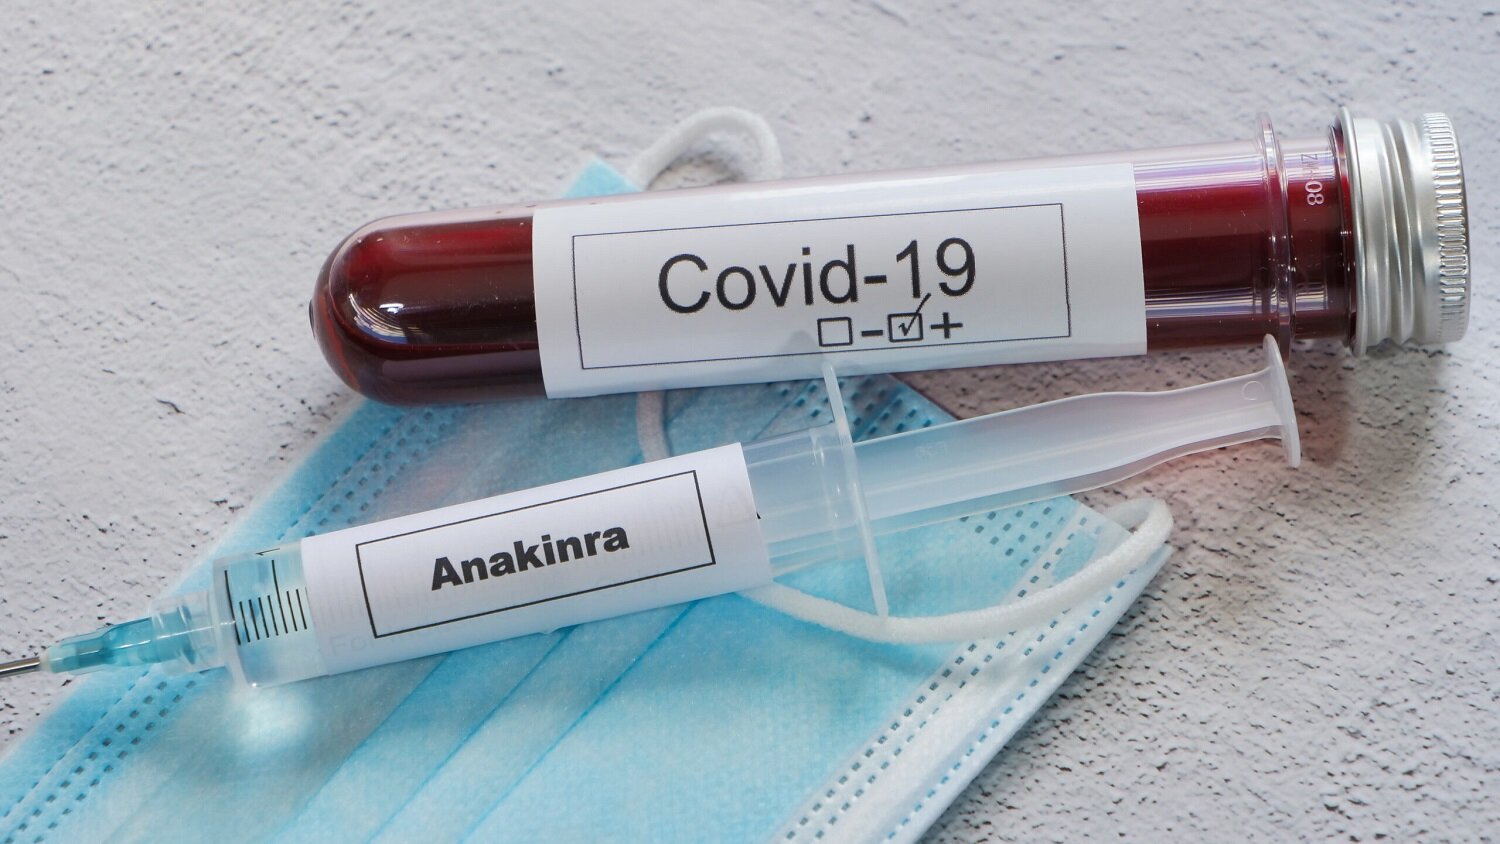 Does Anakinra have a role in the treatment of severe COVID-19?